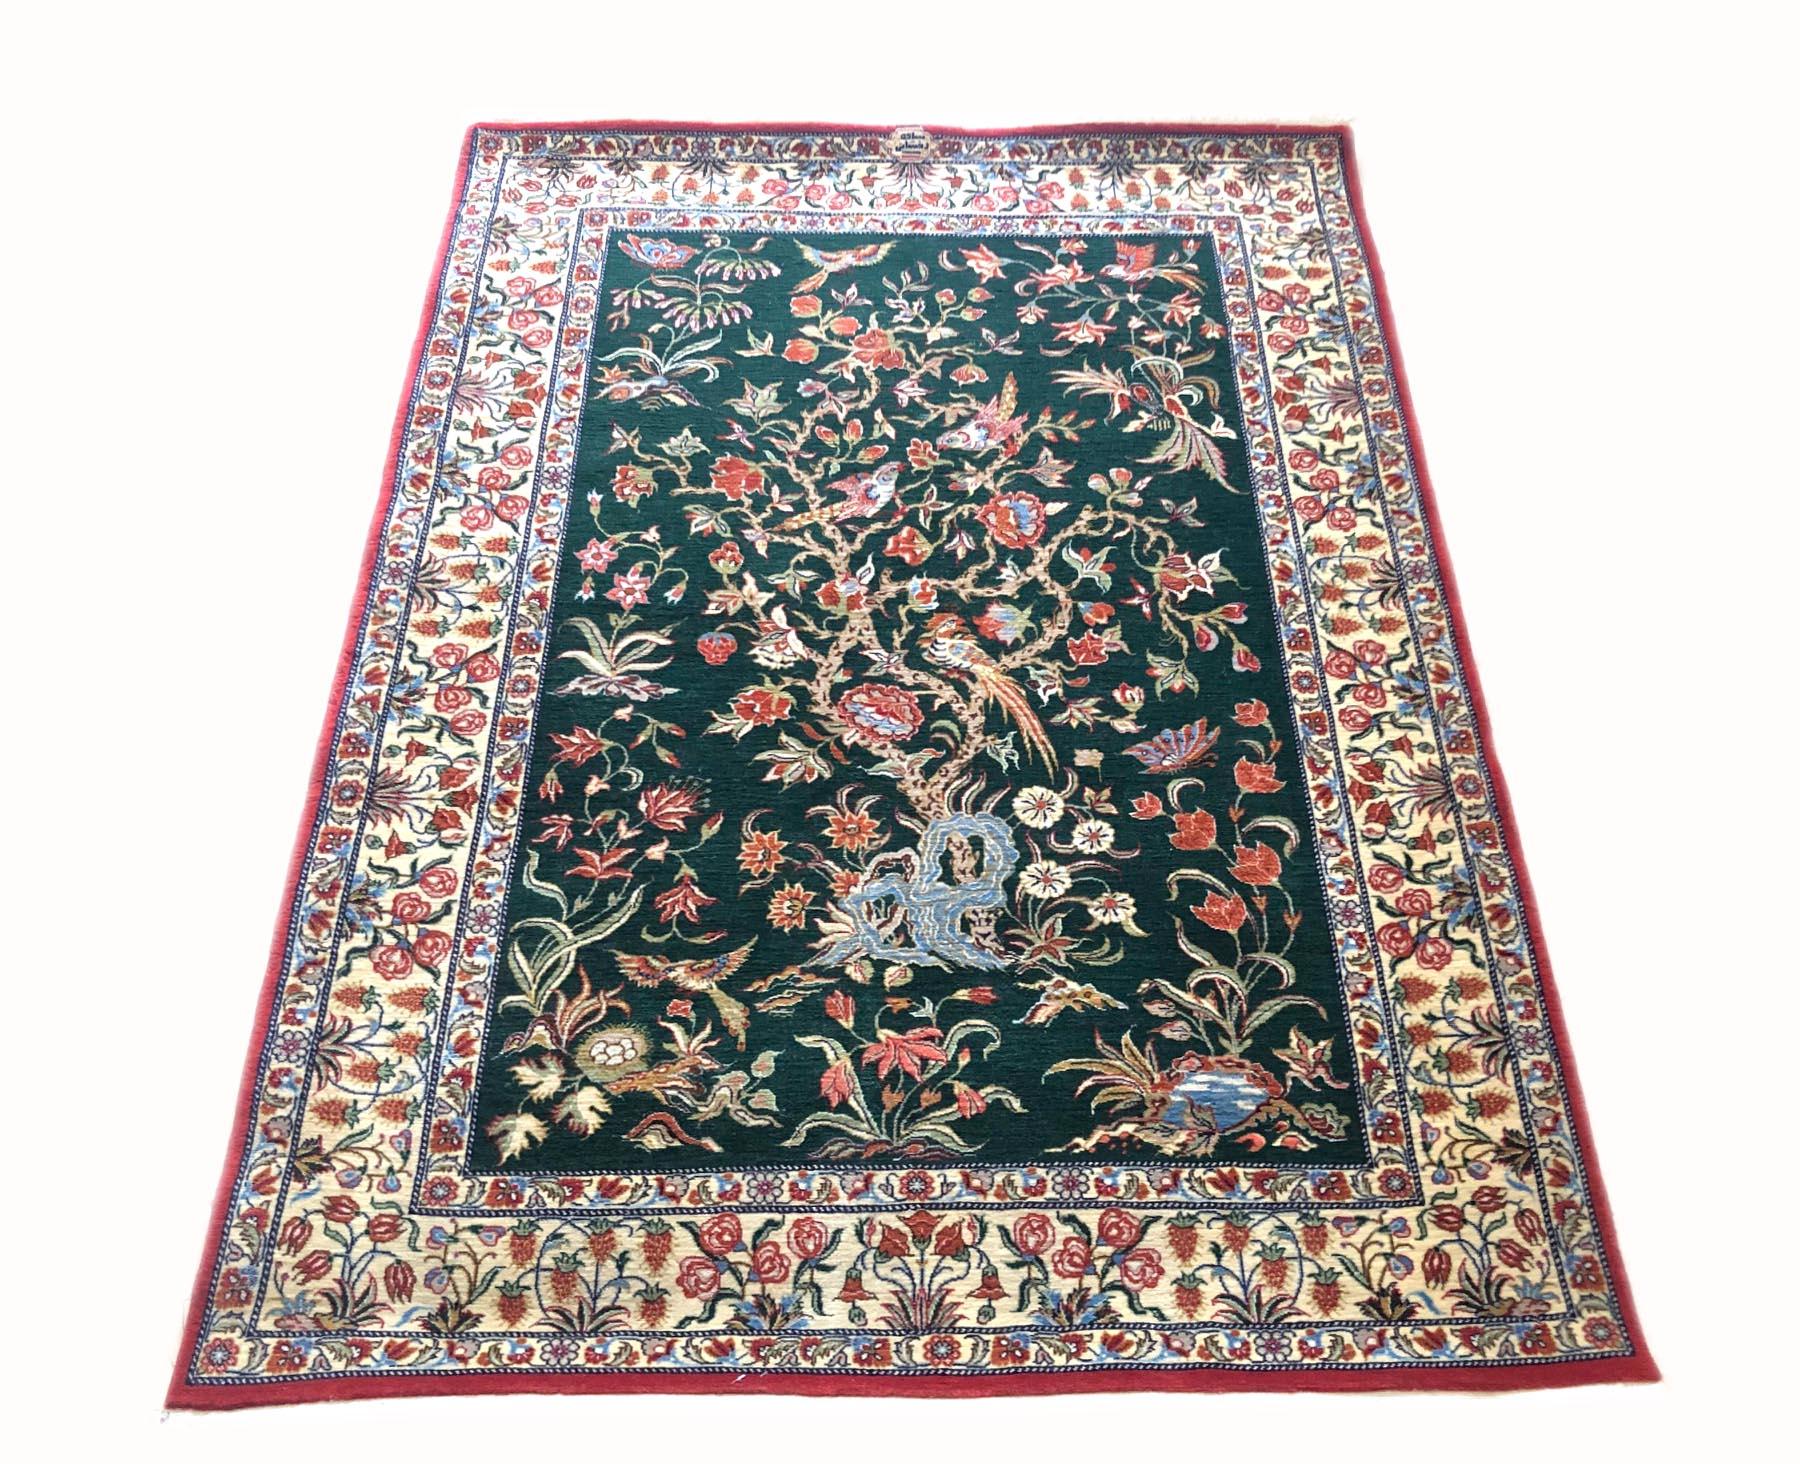 This beautiful Persian Qum rug has wool pile with cotton foundation. The size is 3 feet 3 inch by 4 feet 8 inches. The design is tree of life which is a popular element in many vintage Persian rugs, and is one of the oldest symbols found in rug